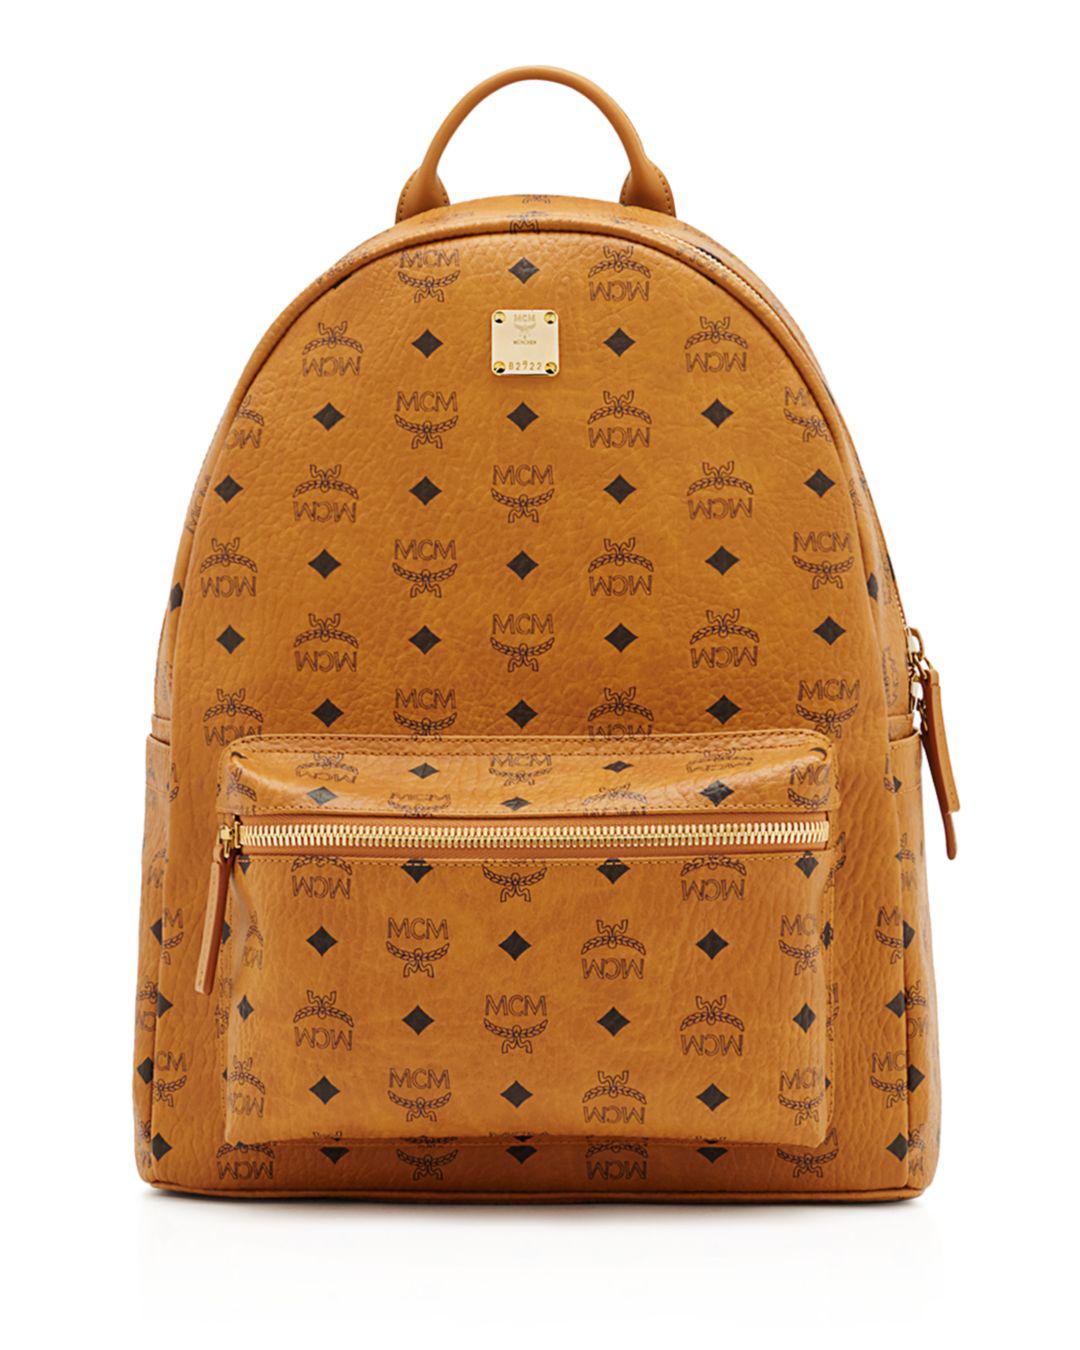 Lyst - Mcm Stark No Stud Medium Leather Backpack in Brown for Men - Save 16.45569620253164%